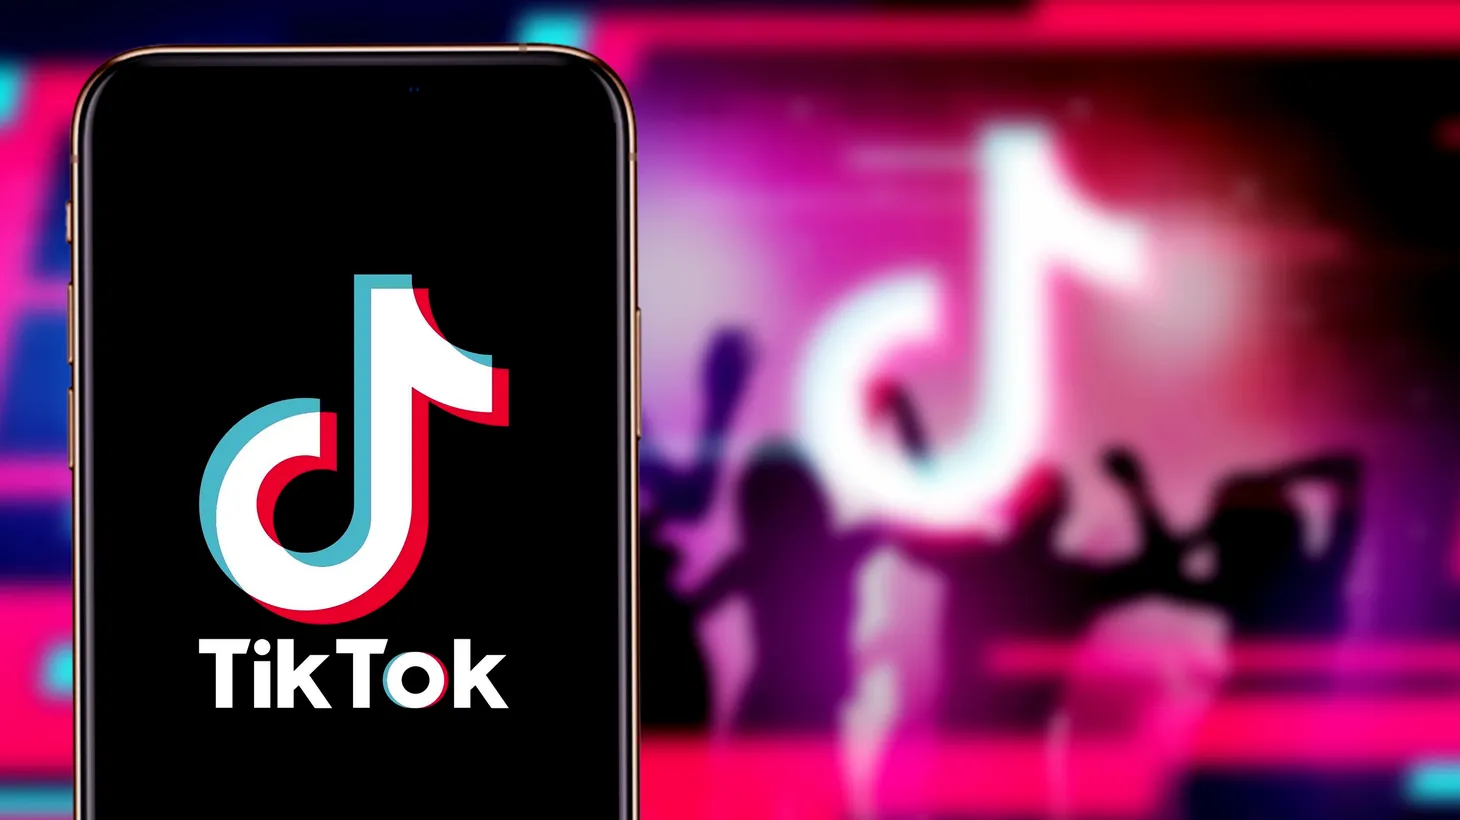 “As [TikTok] has grown in revenue and users as this large global company, Universal is saying, ‘It is now time for you to be paying market rate,’” says Wall Street Journal Reporter Anne Steele.